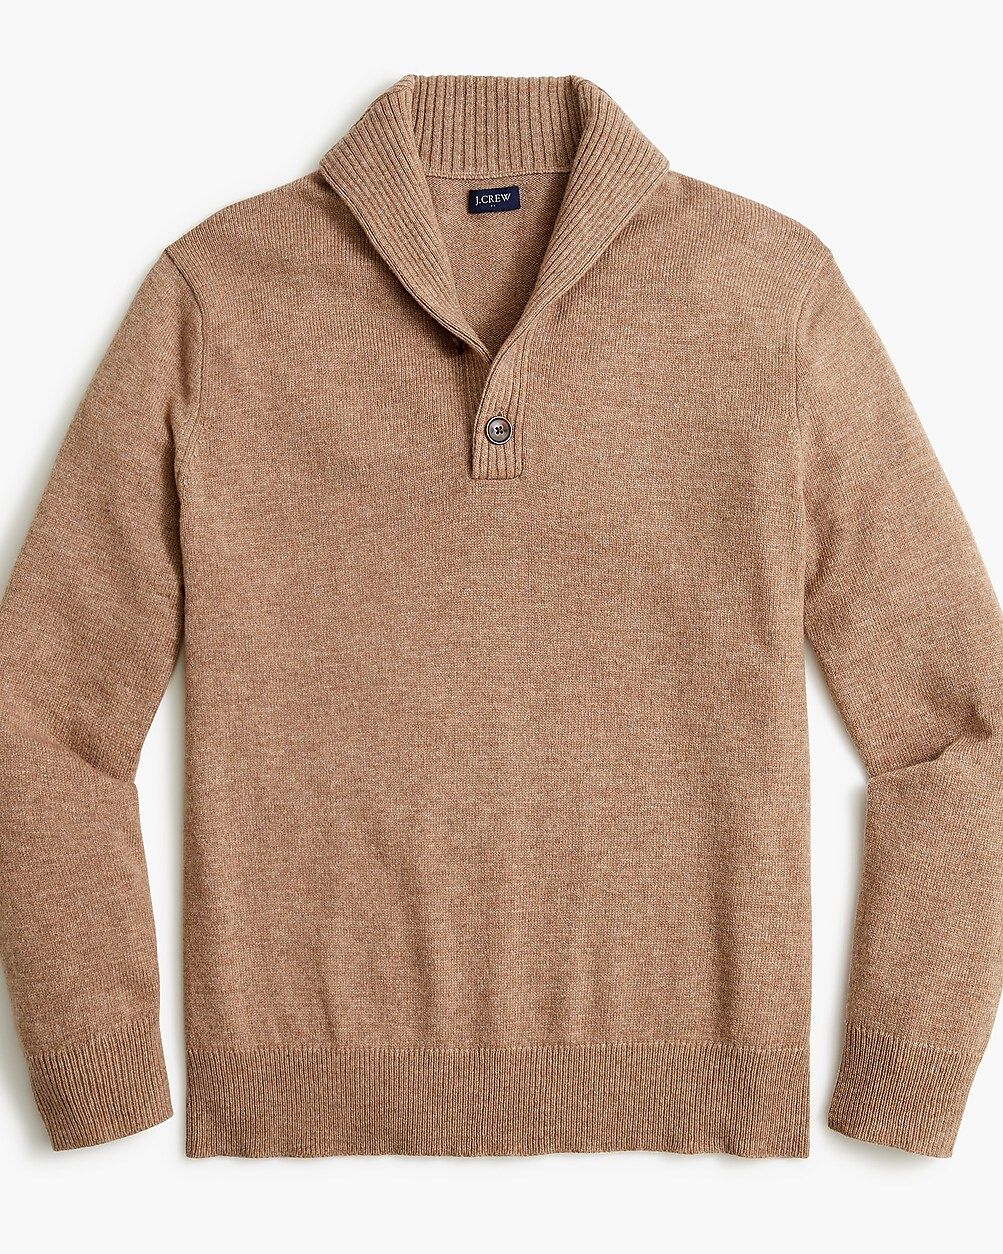 Shawl-collar sweater in supersoft lambswool blend | J.Crew Factory